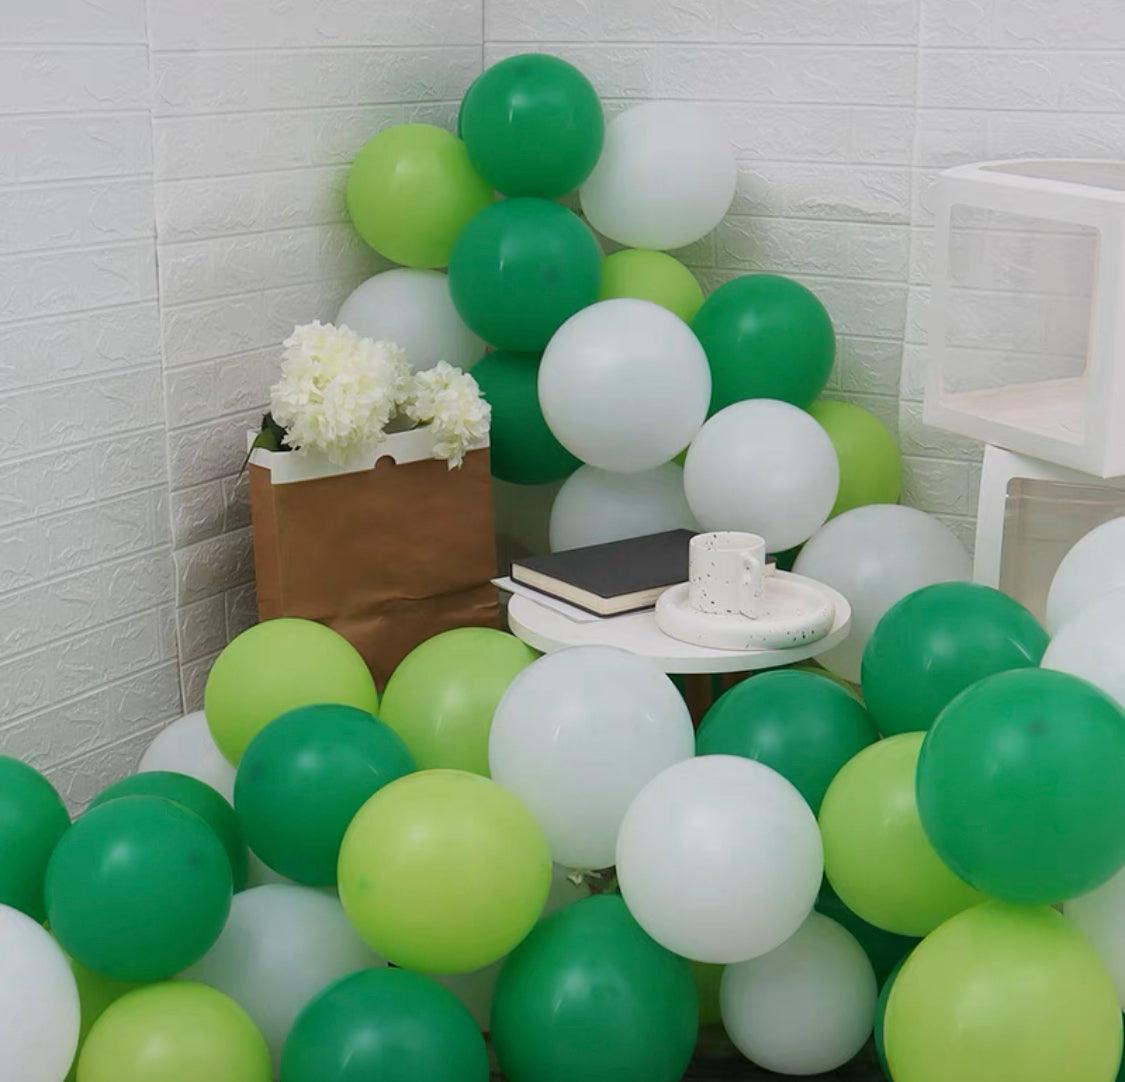 Global Shipping (50 pack) 11 inch Green Forest Theme Balloons (Balloons only) - ONE UP BALLOONS